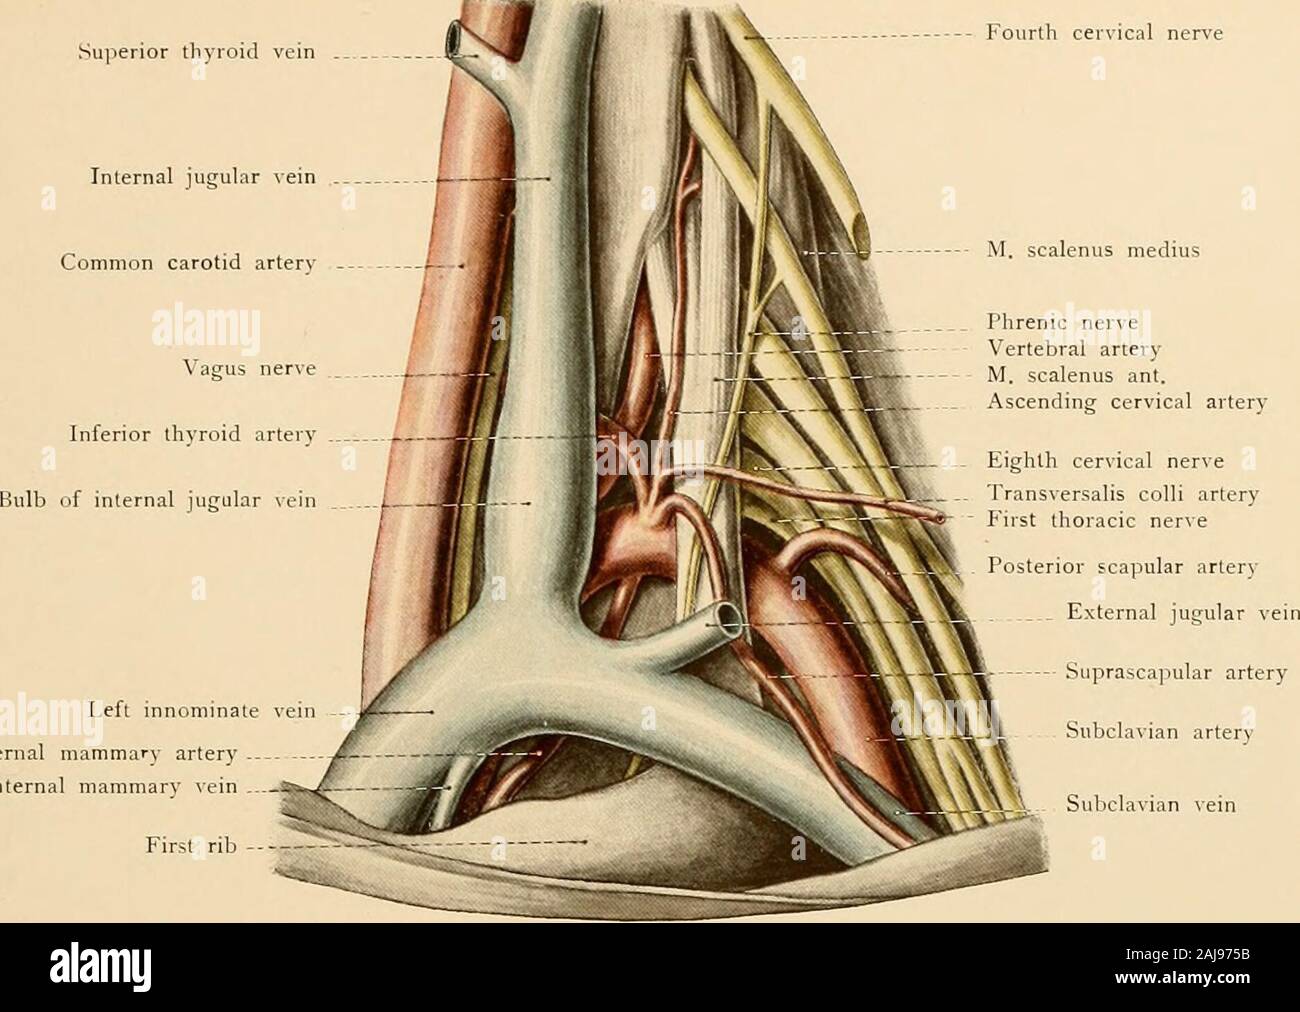 Atlas and text-book of topographic and applied anatomy . muscle. (d) The suprascapular, which is frequently an independent branch of the subclavian artery.This vessel runs slightly downward to the upper margin of the scapula and is concealed beneaththe clavicle; it passes over the transverse ligament of the scapula to reach the supraspinous fossaand then skirts the neck of the bone and enters the infraspinous fossa. It supplies the supra-spinatus and infraspinatus muscles and anastomoses with the subscapular branch of the axillaryartery (see page 74 and Fig. 30). 4. The coslocervical axis, a s Stock Photo